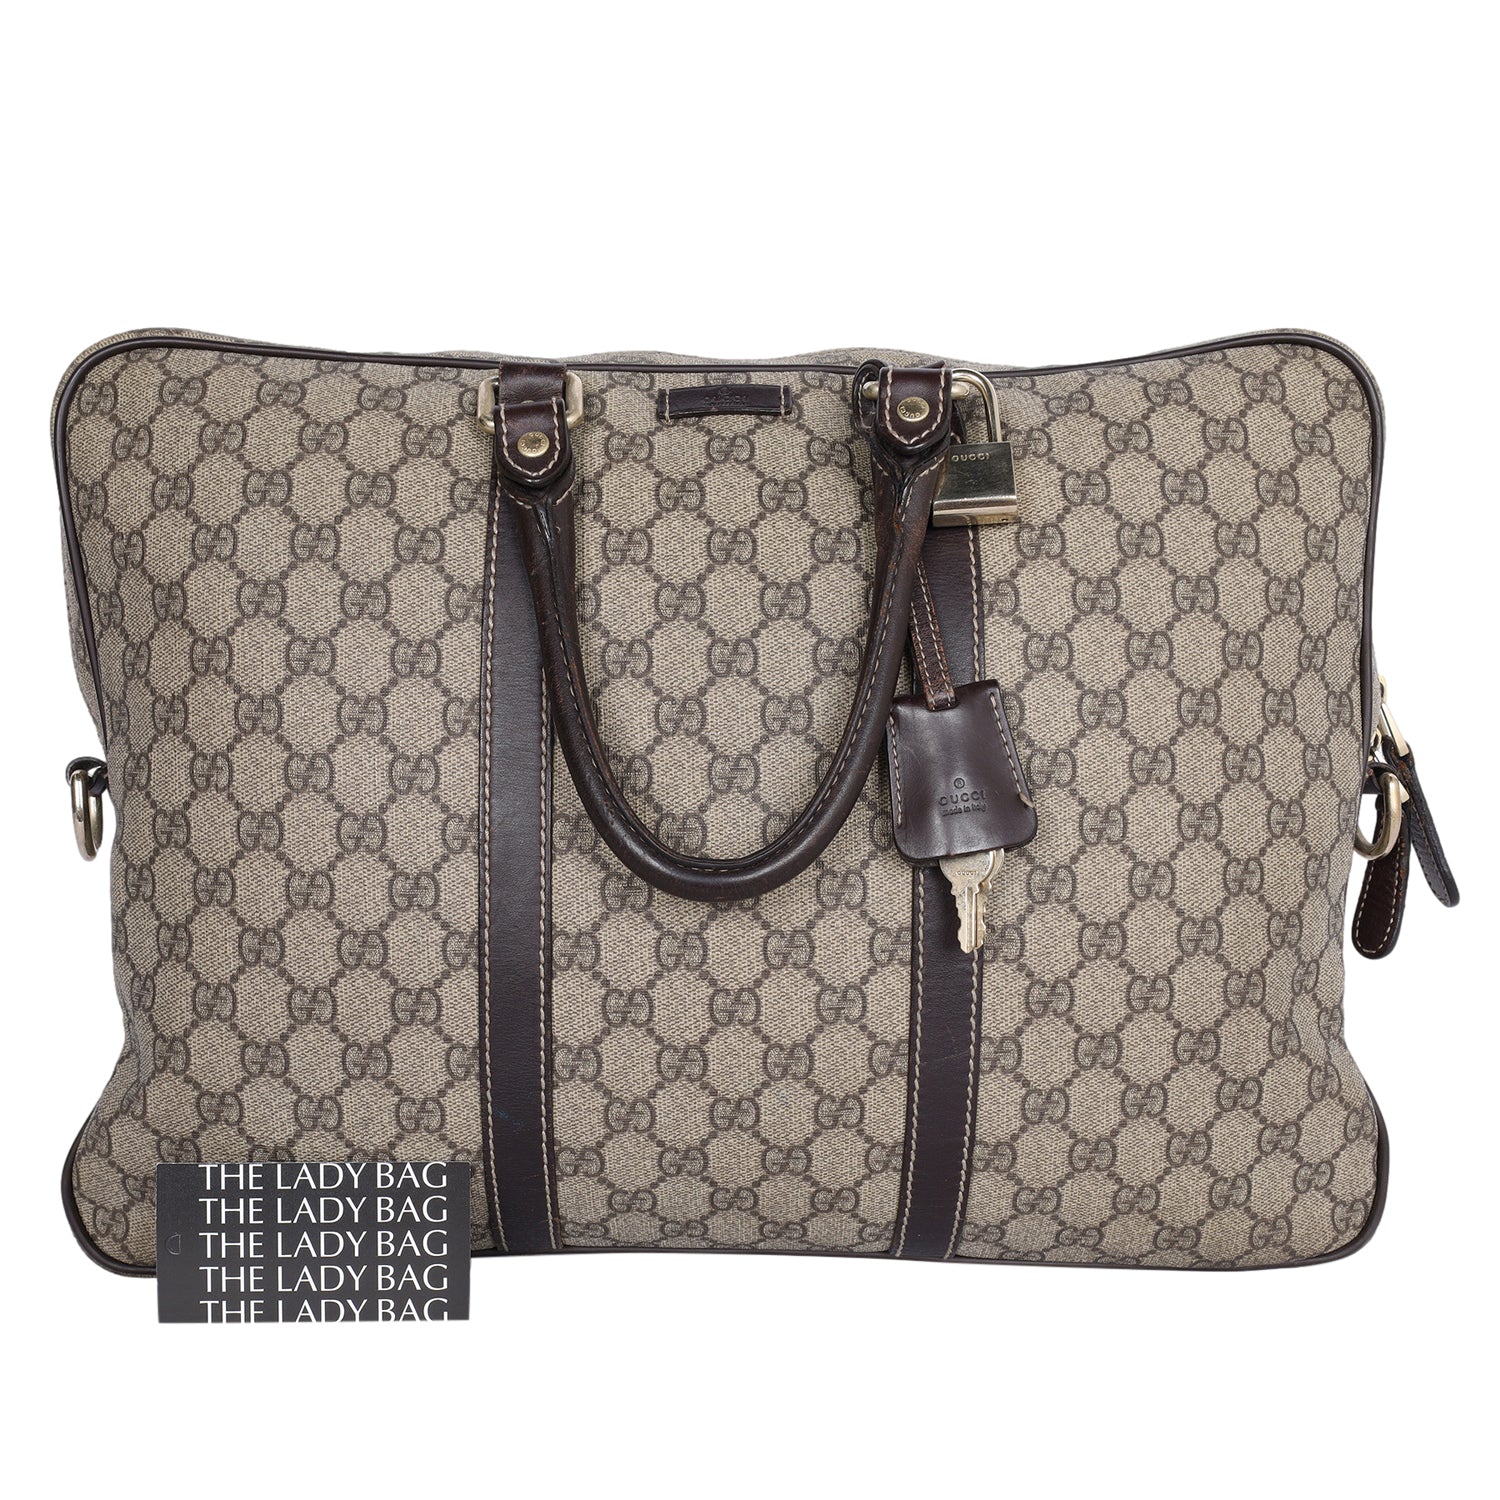 GG Canvas Monogram Briefcase Bag (Authentic Pre-Owned) – The Lady Bag